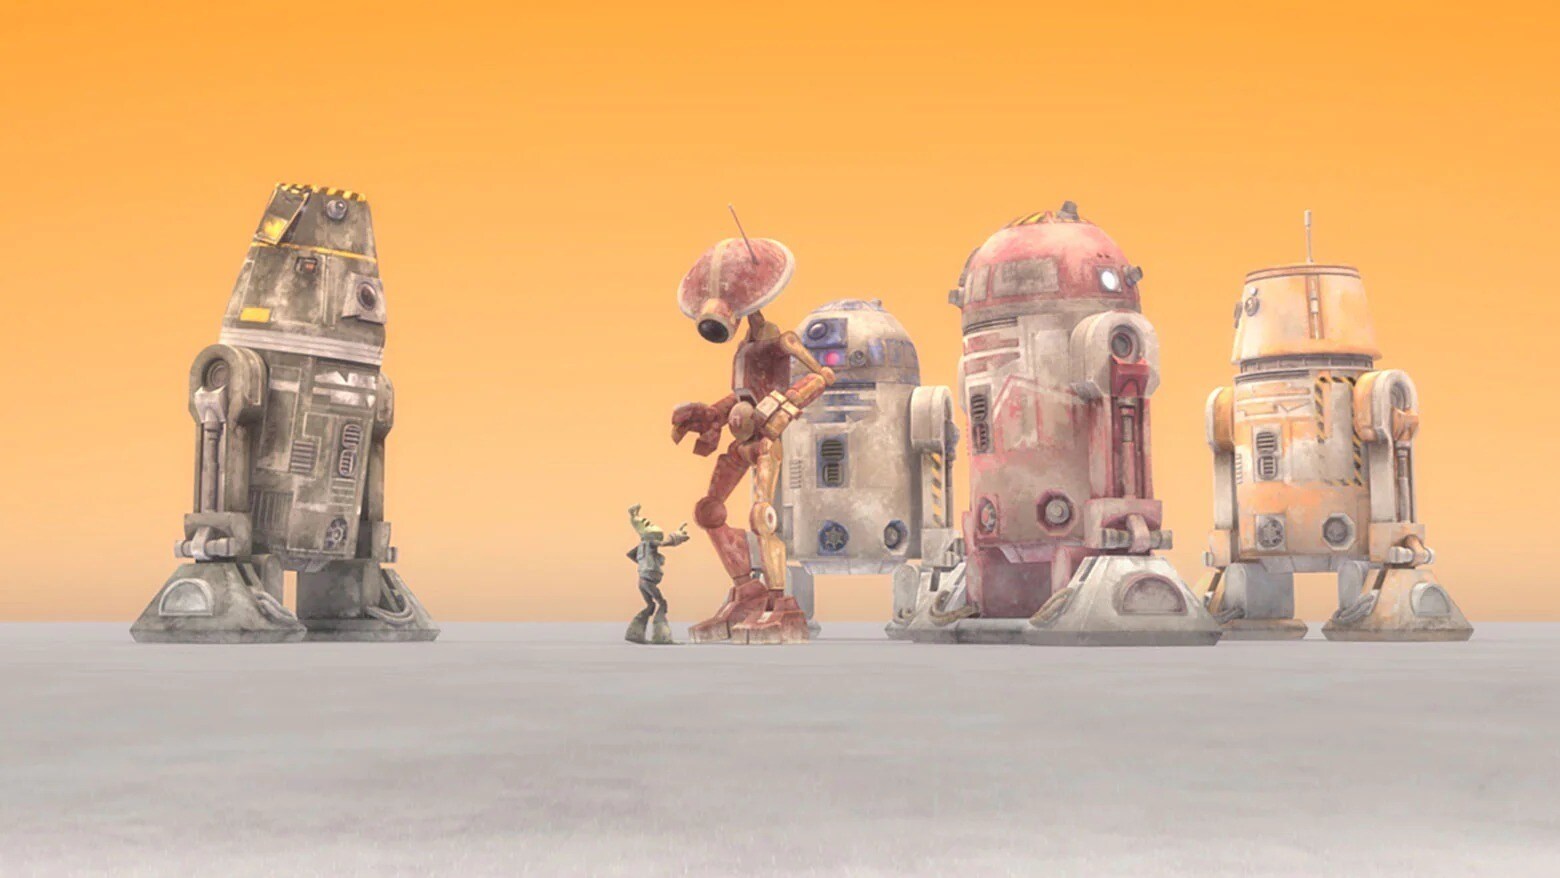 A group of droids in The Clone Wars